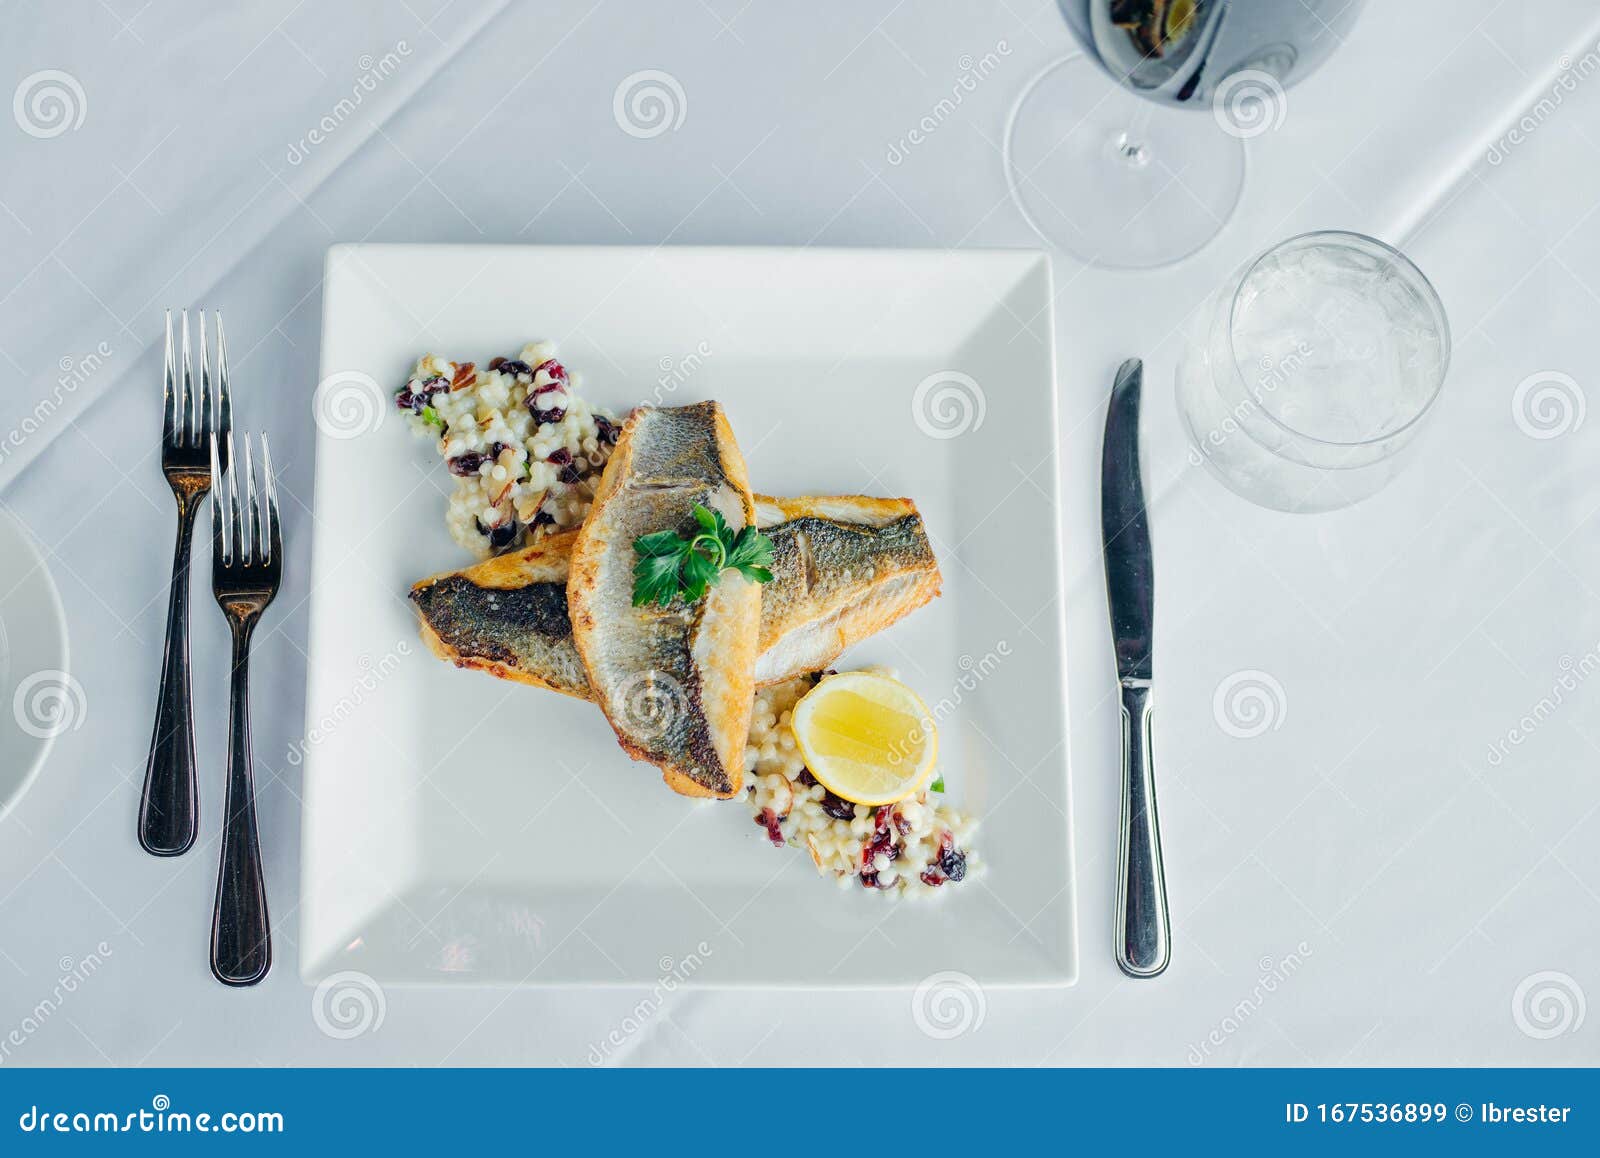 fish dish - fish fillet and vegetables in restaurante